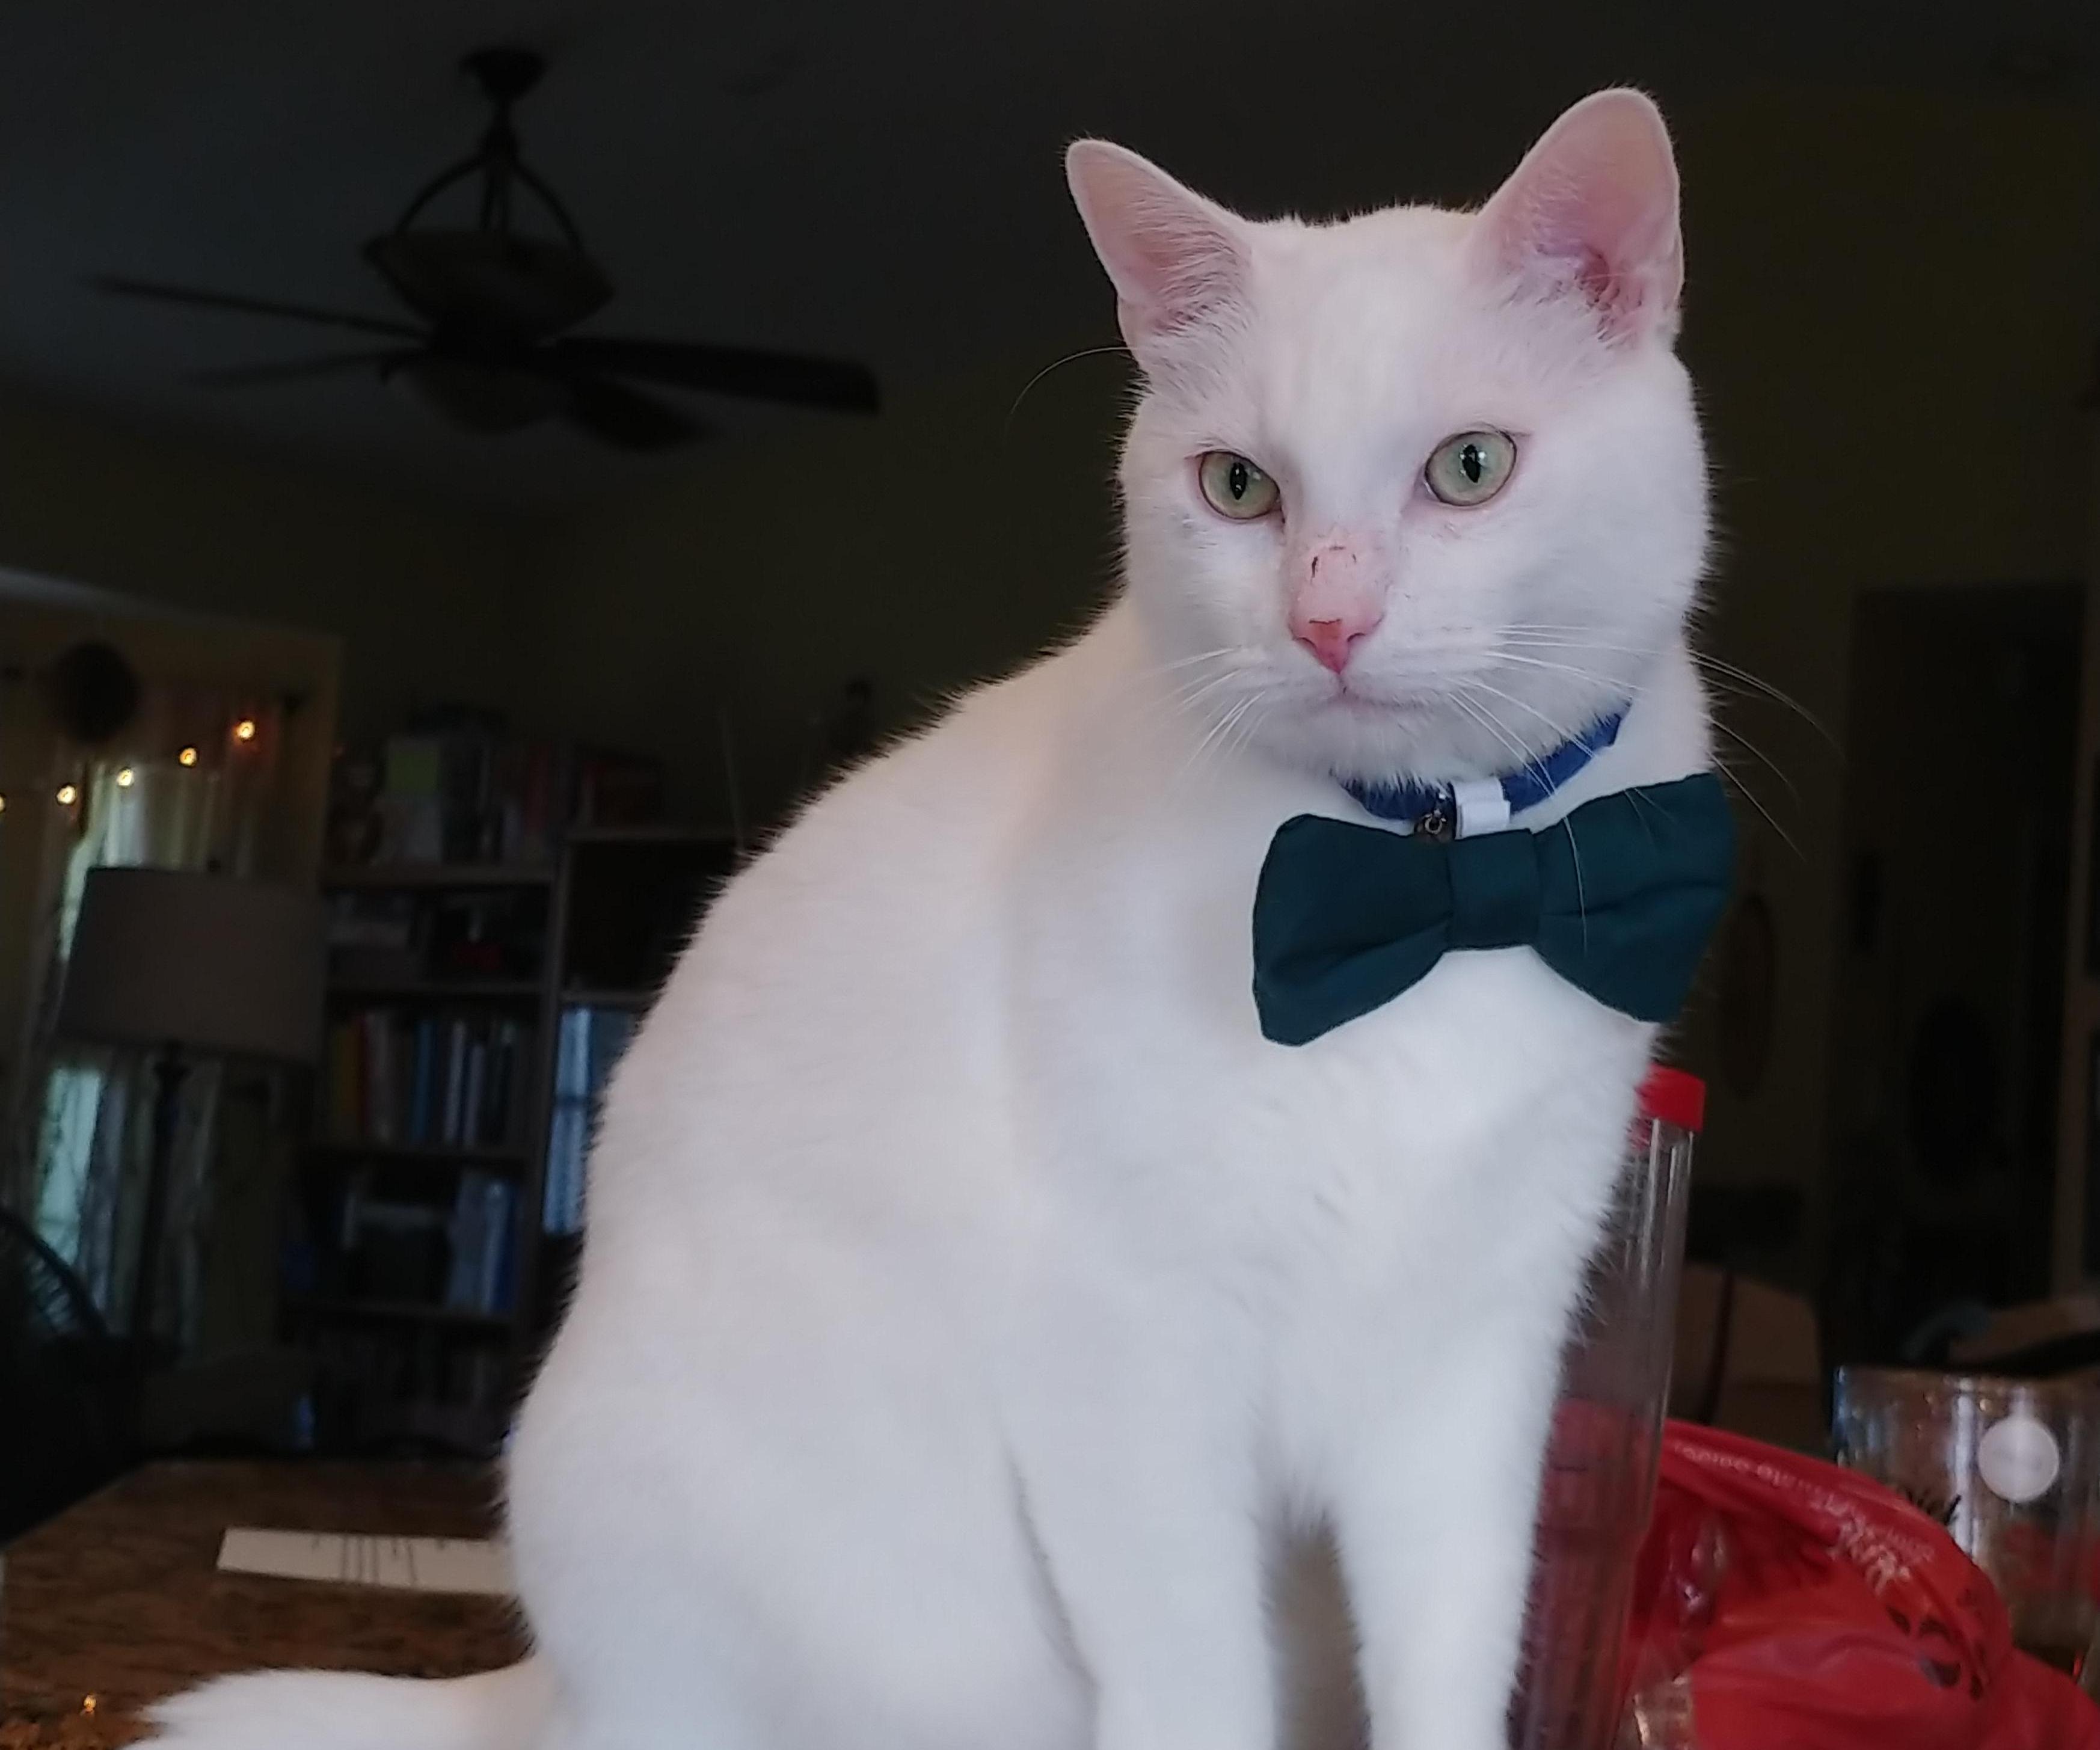 How to Make a Bowtie for Your Cat